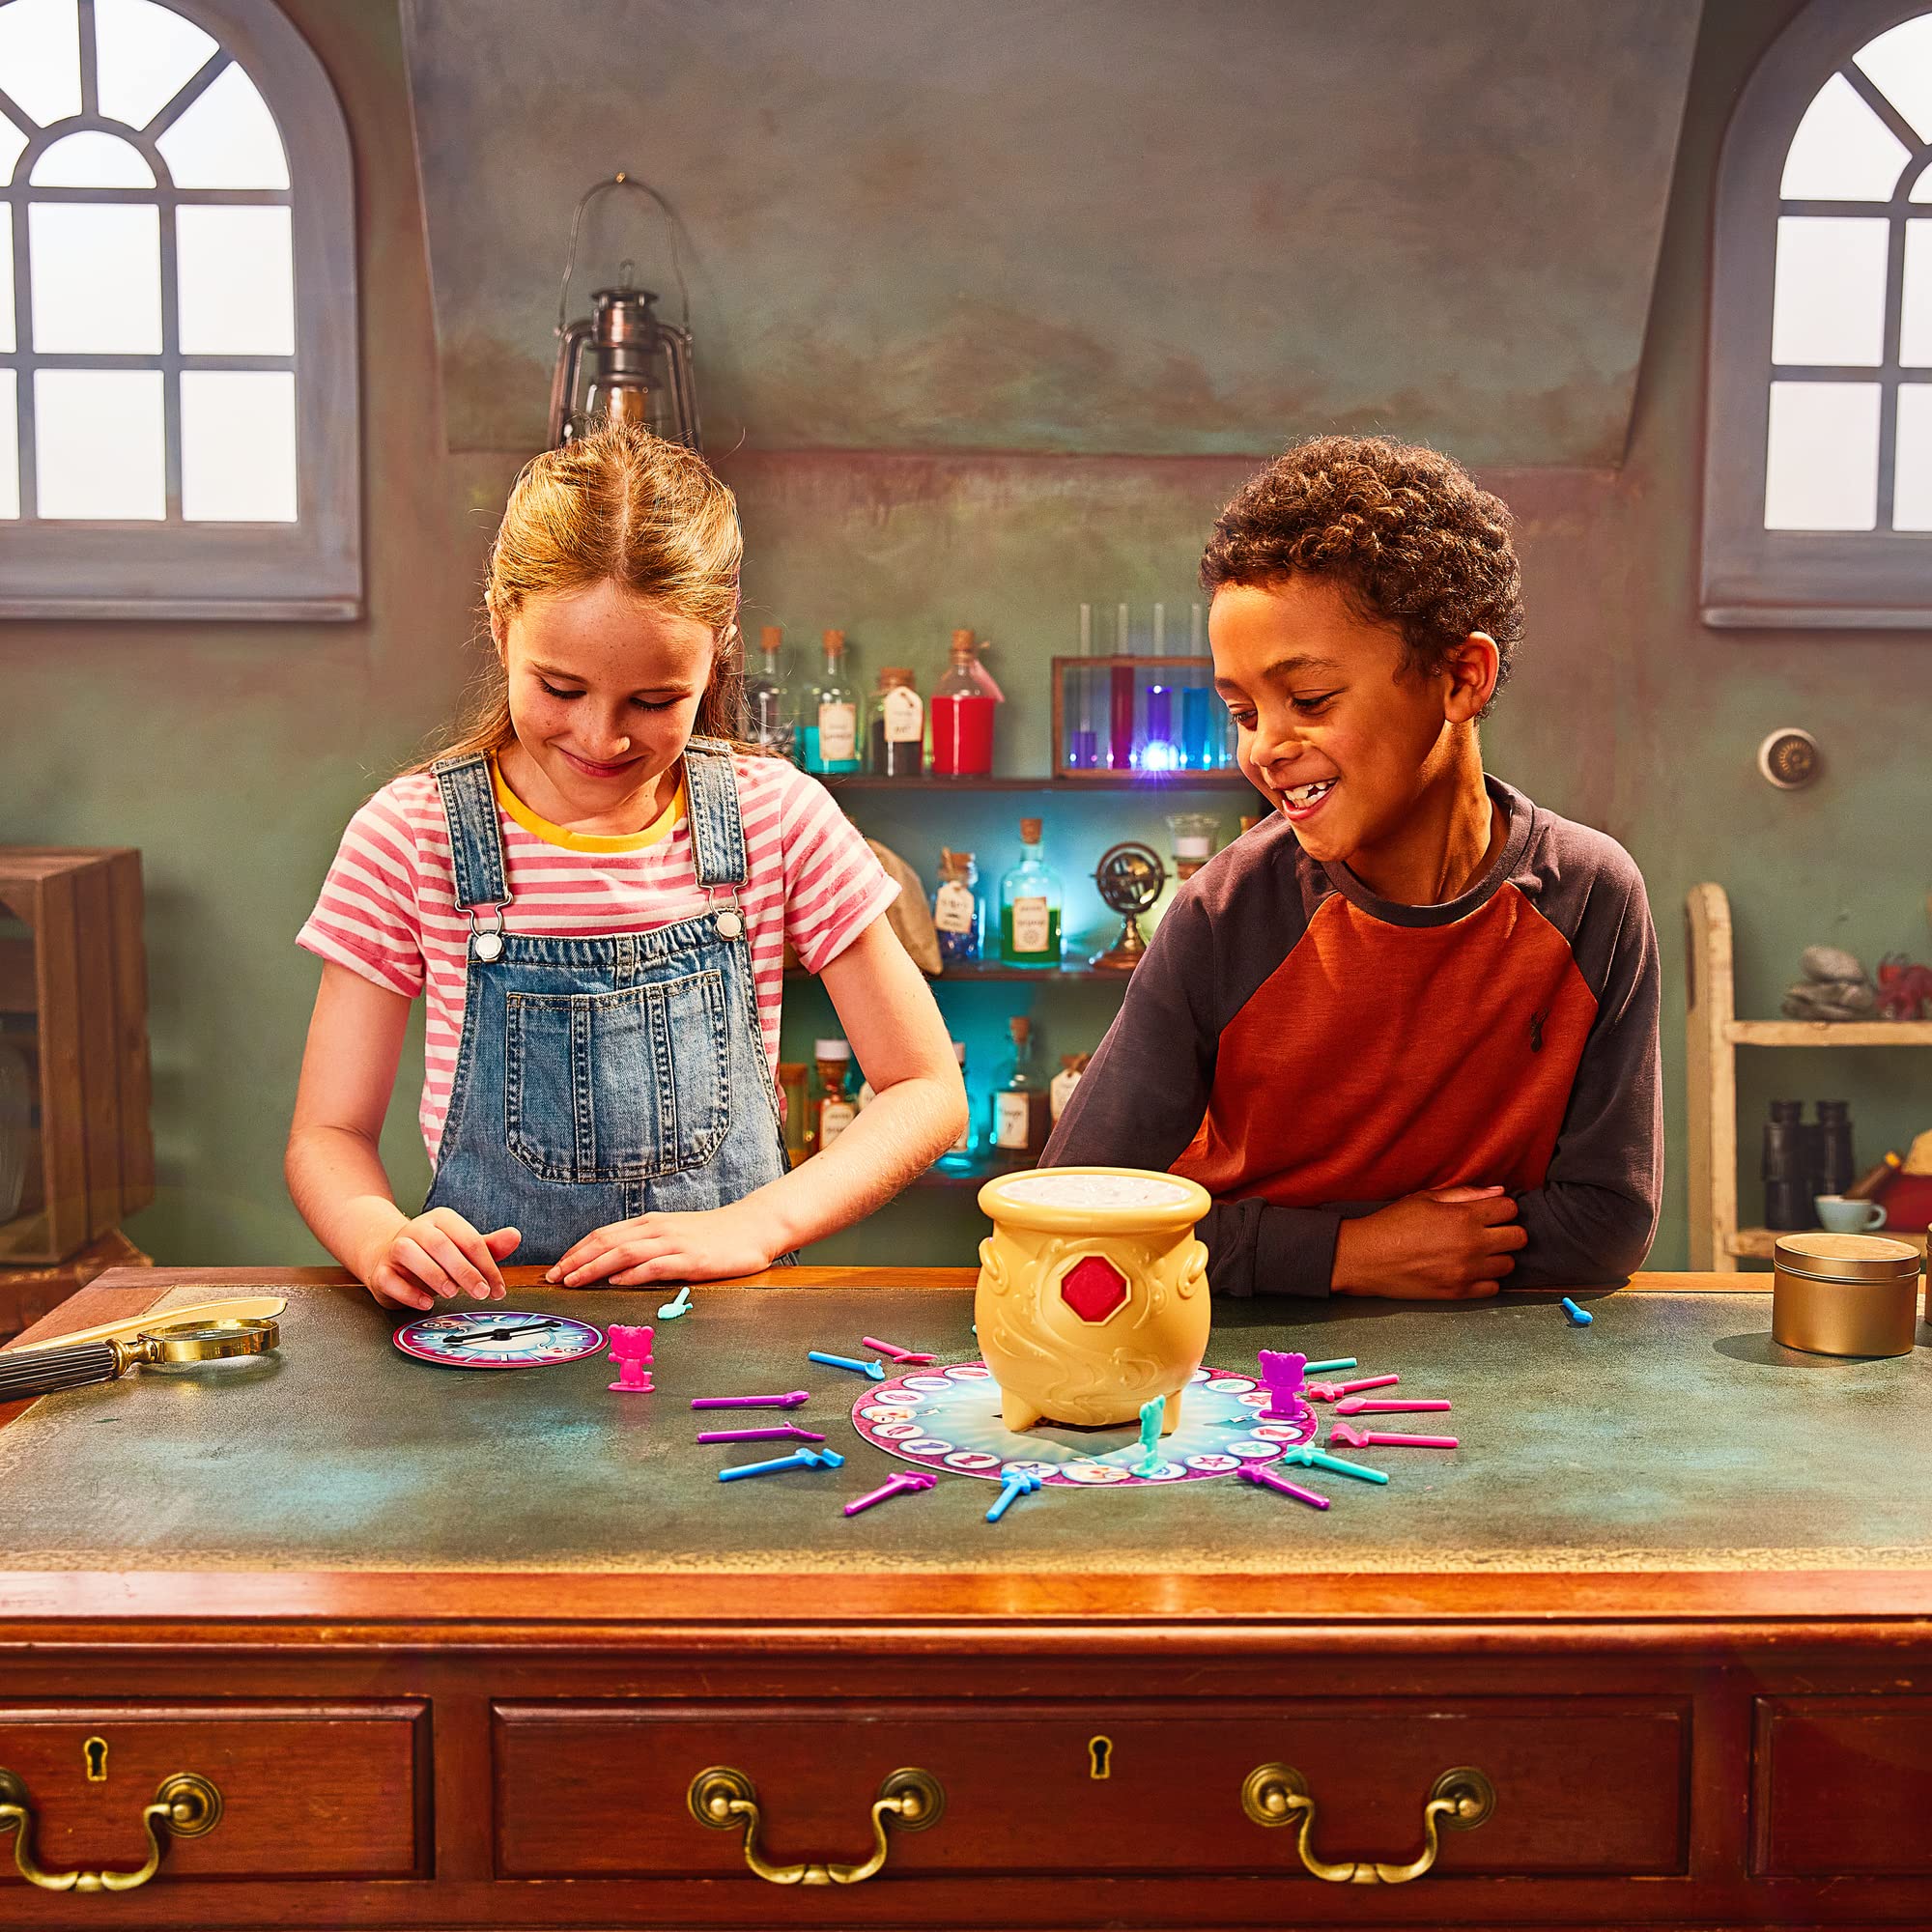 Moose games Magic Mixies Potion Game, Place The Magic Ingredients Into The Cauldron and Make The Mixie Pop Up to Win